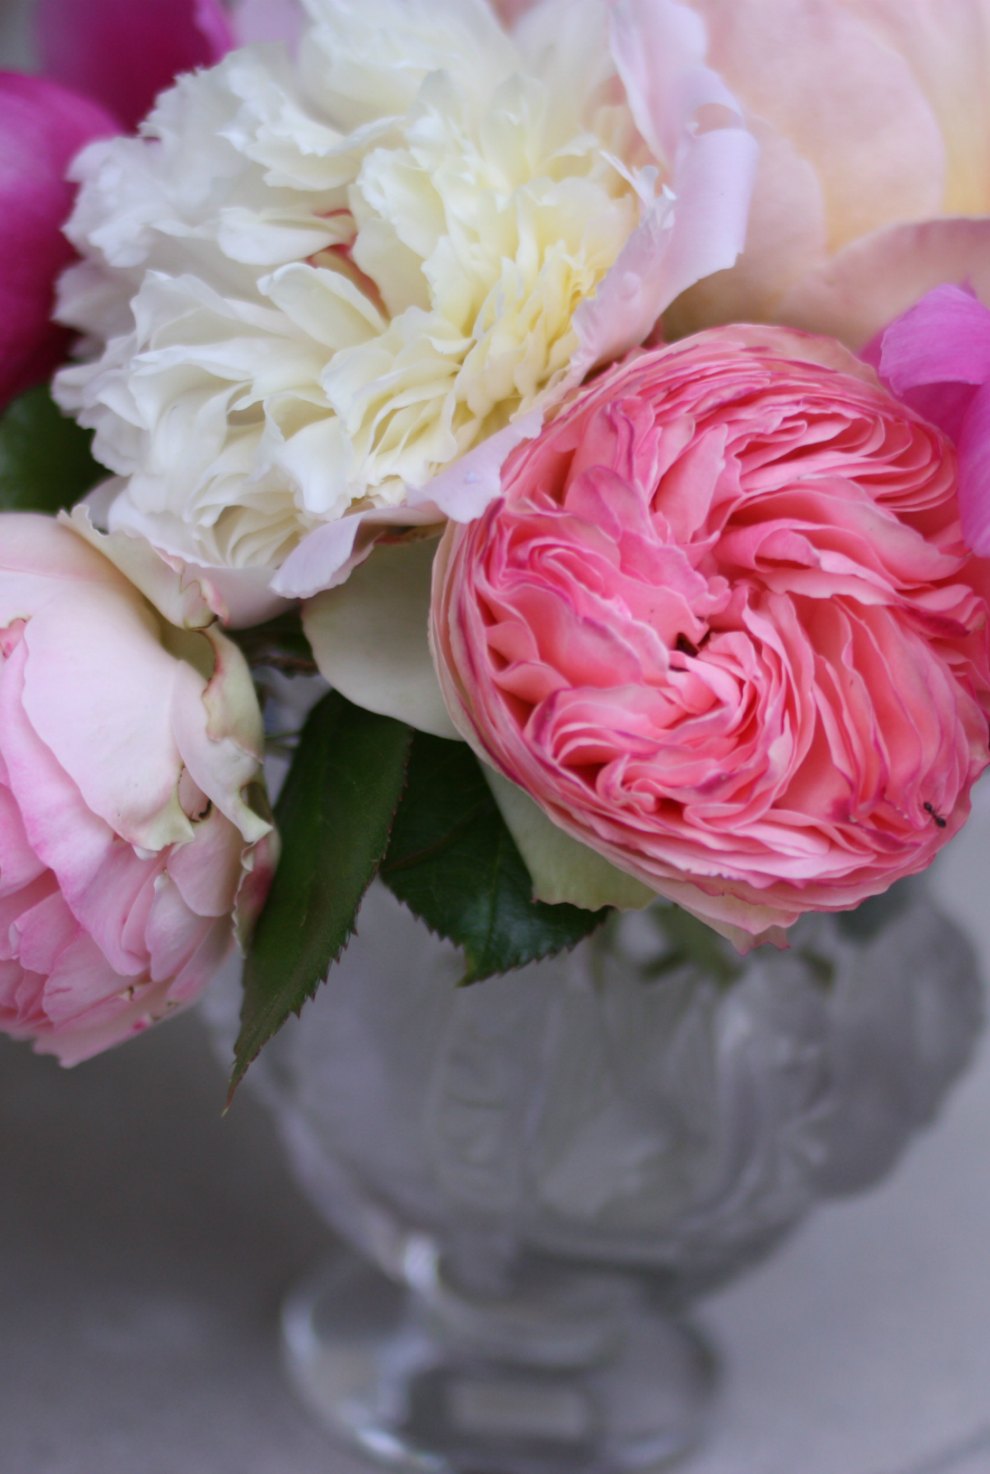 roses and peonies